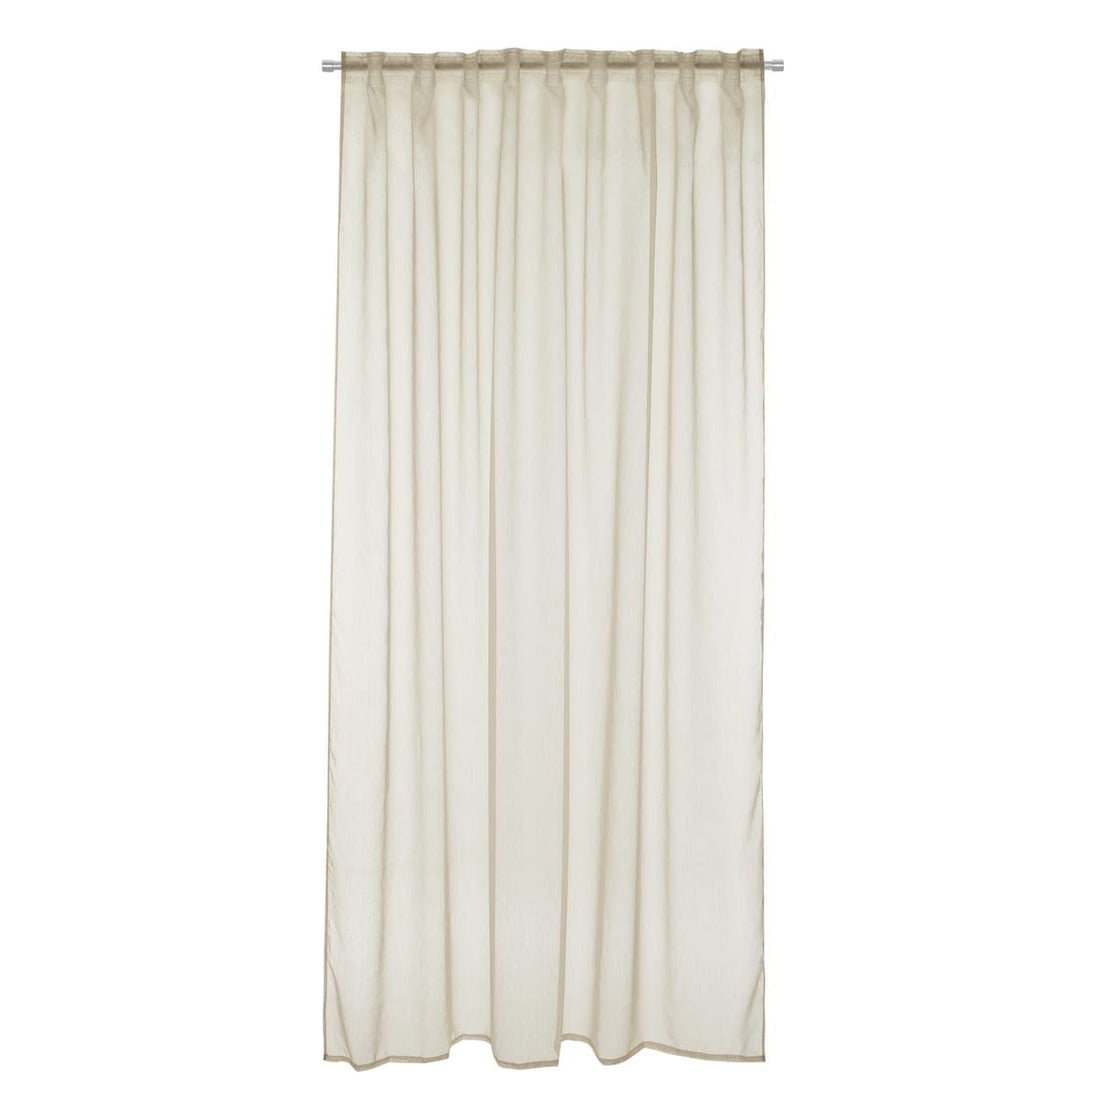 BEIGE SOFTY FILTER CURTAIN 200X280 CM WITH CONCEALED LOOP AND WEBBING - best price from Maltashopper.com BR480009477